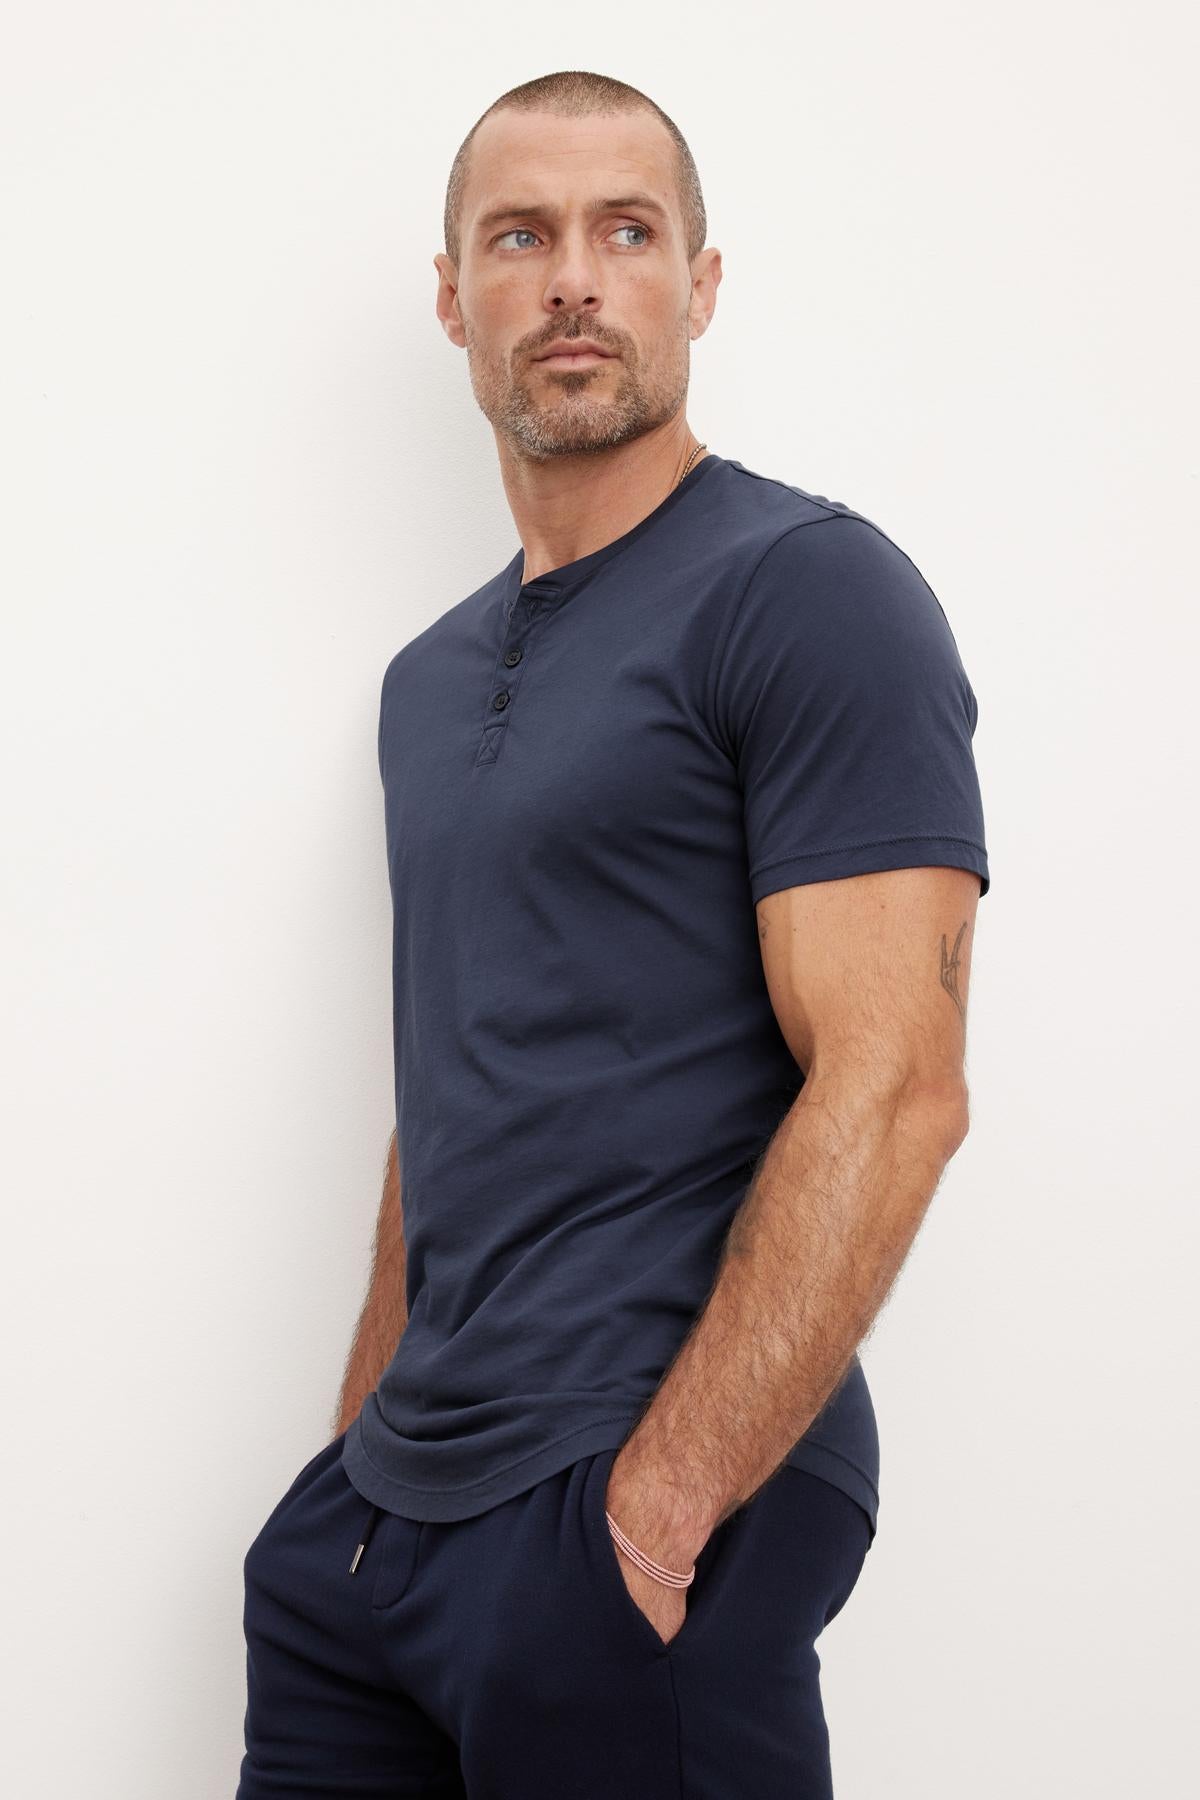   Man in a navy blue Velvet by Graham & Spencer Fulton Henley and pants posing with his hand in his pocket against a white background. 